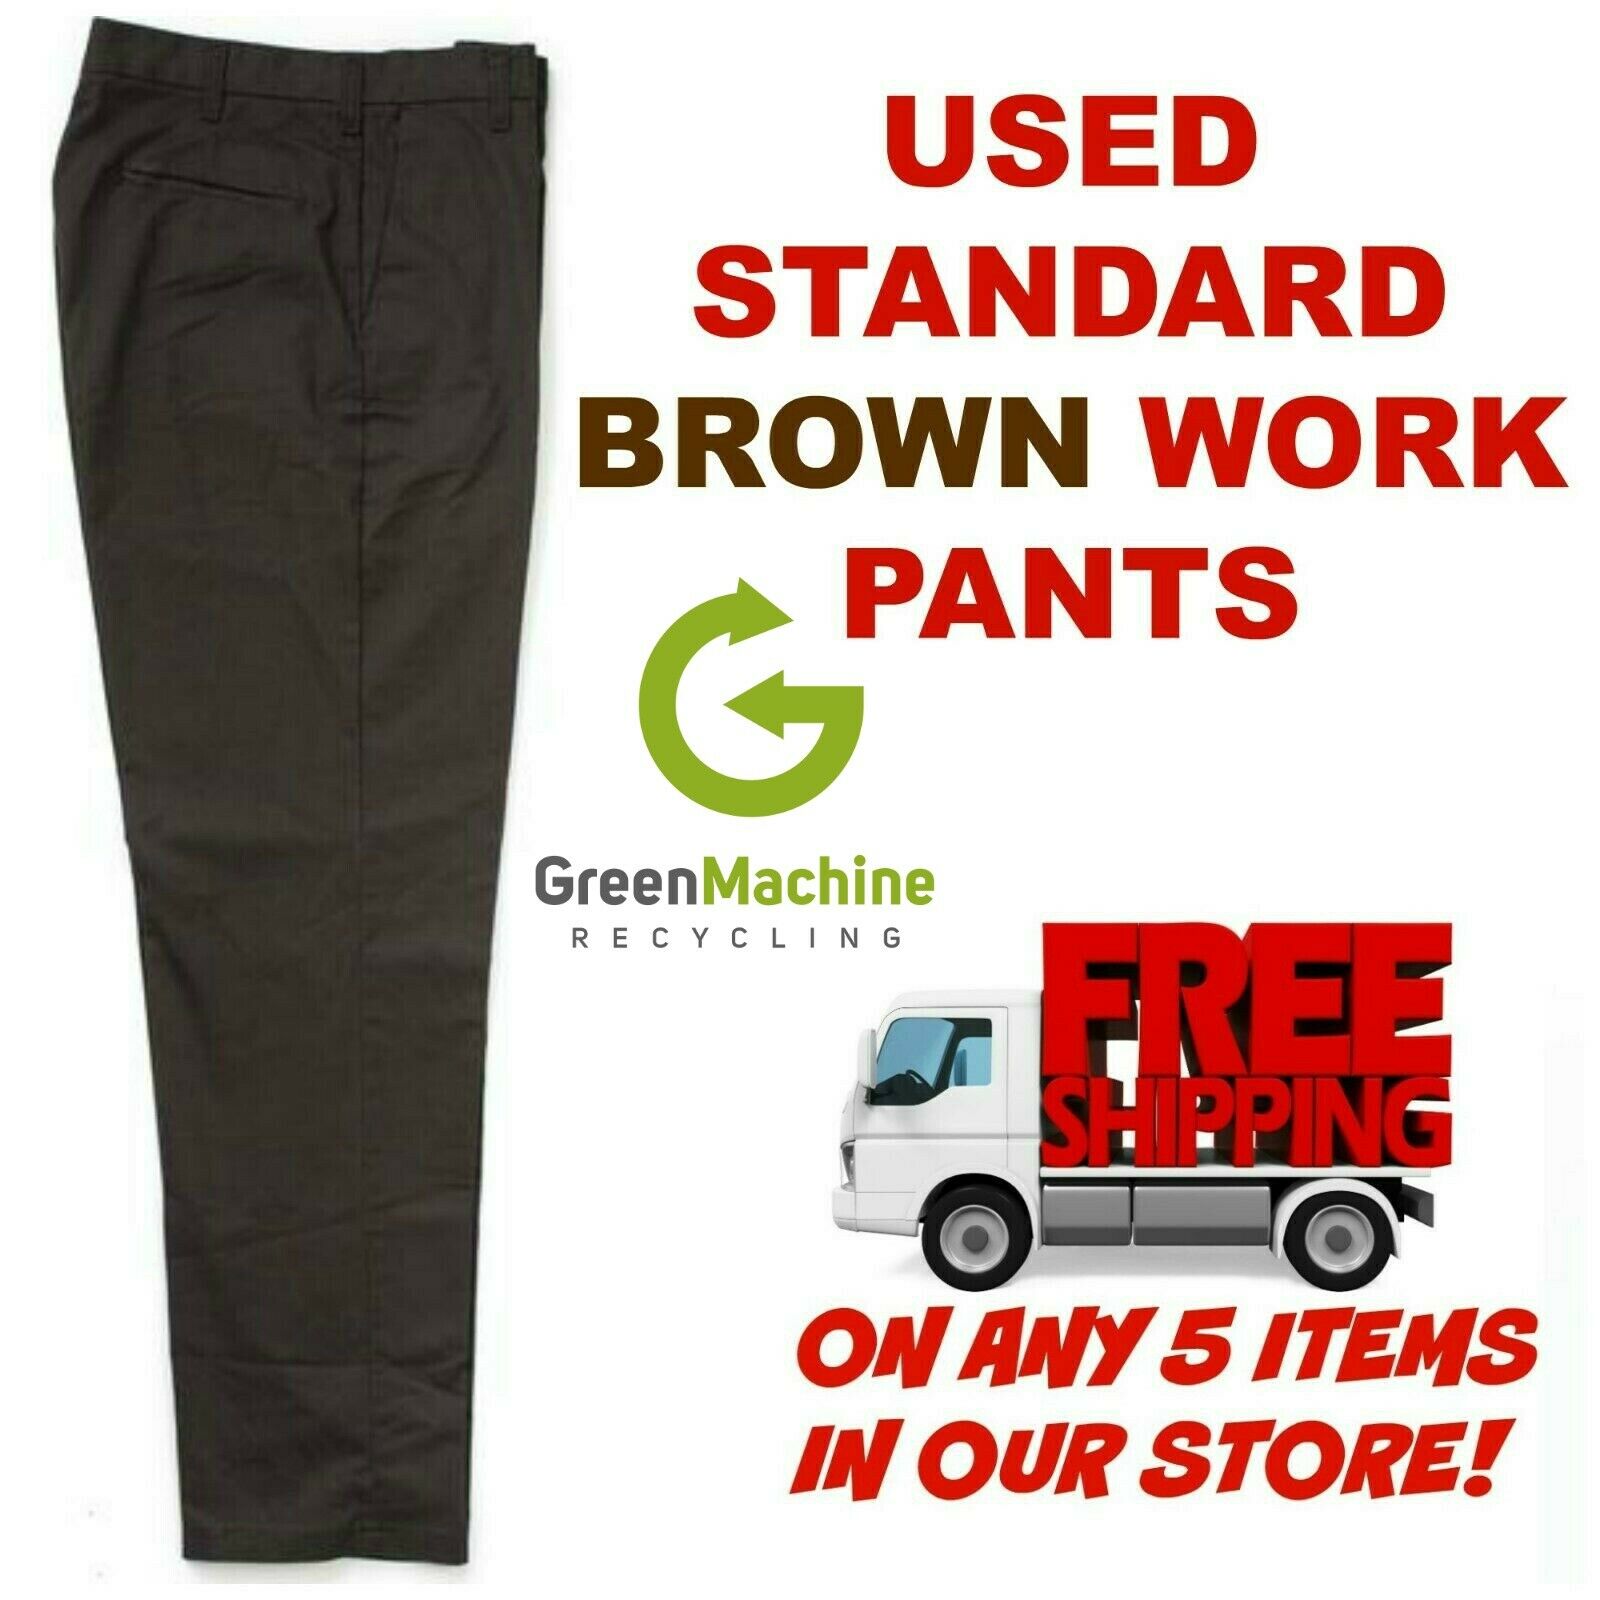 Used Uniform Work Pants Cintas Redkap Unifirst G&k Dickies And Others